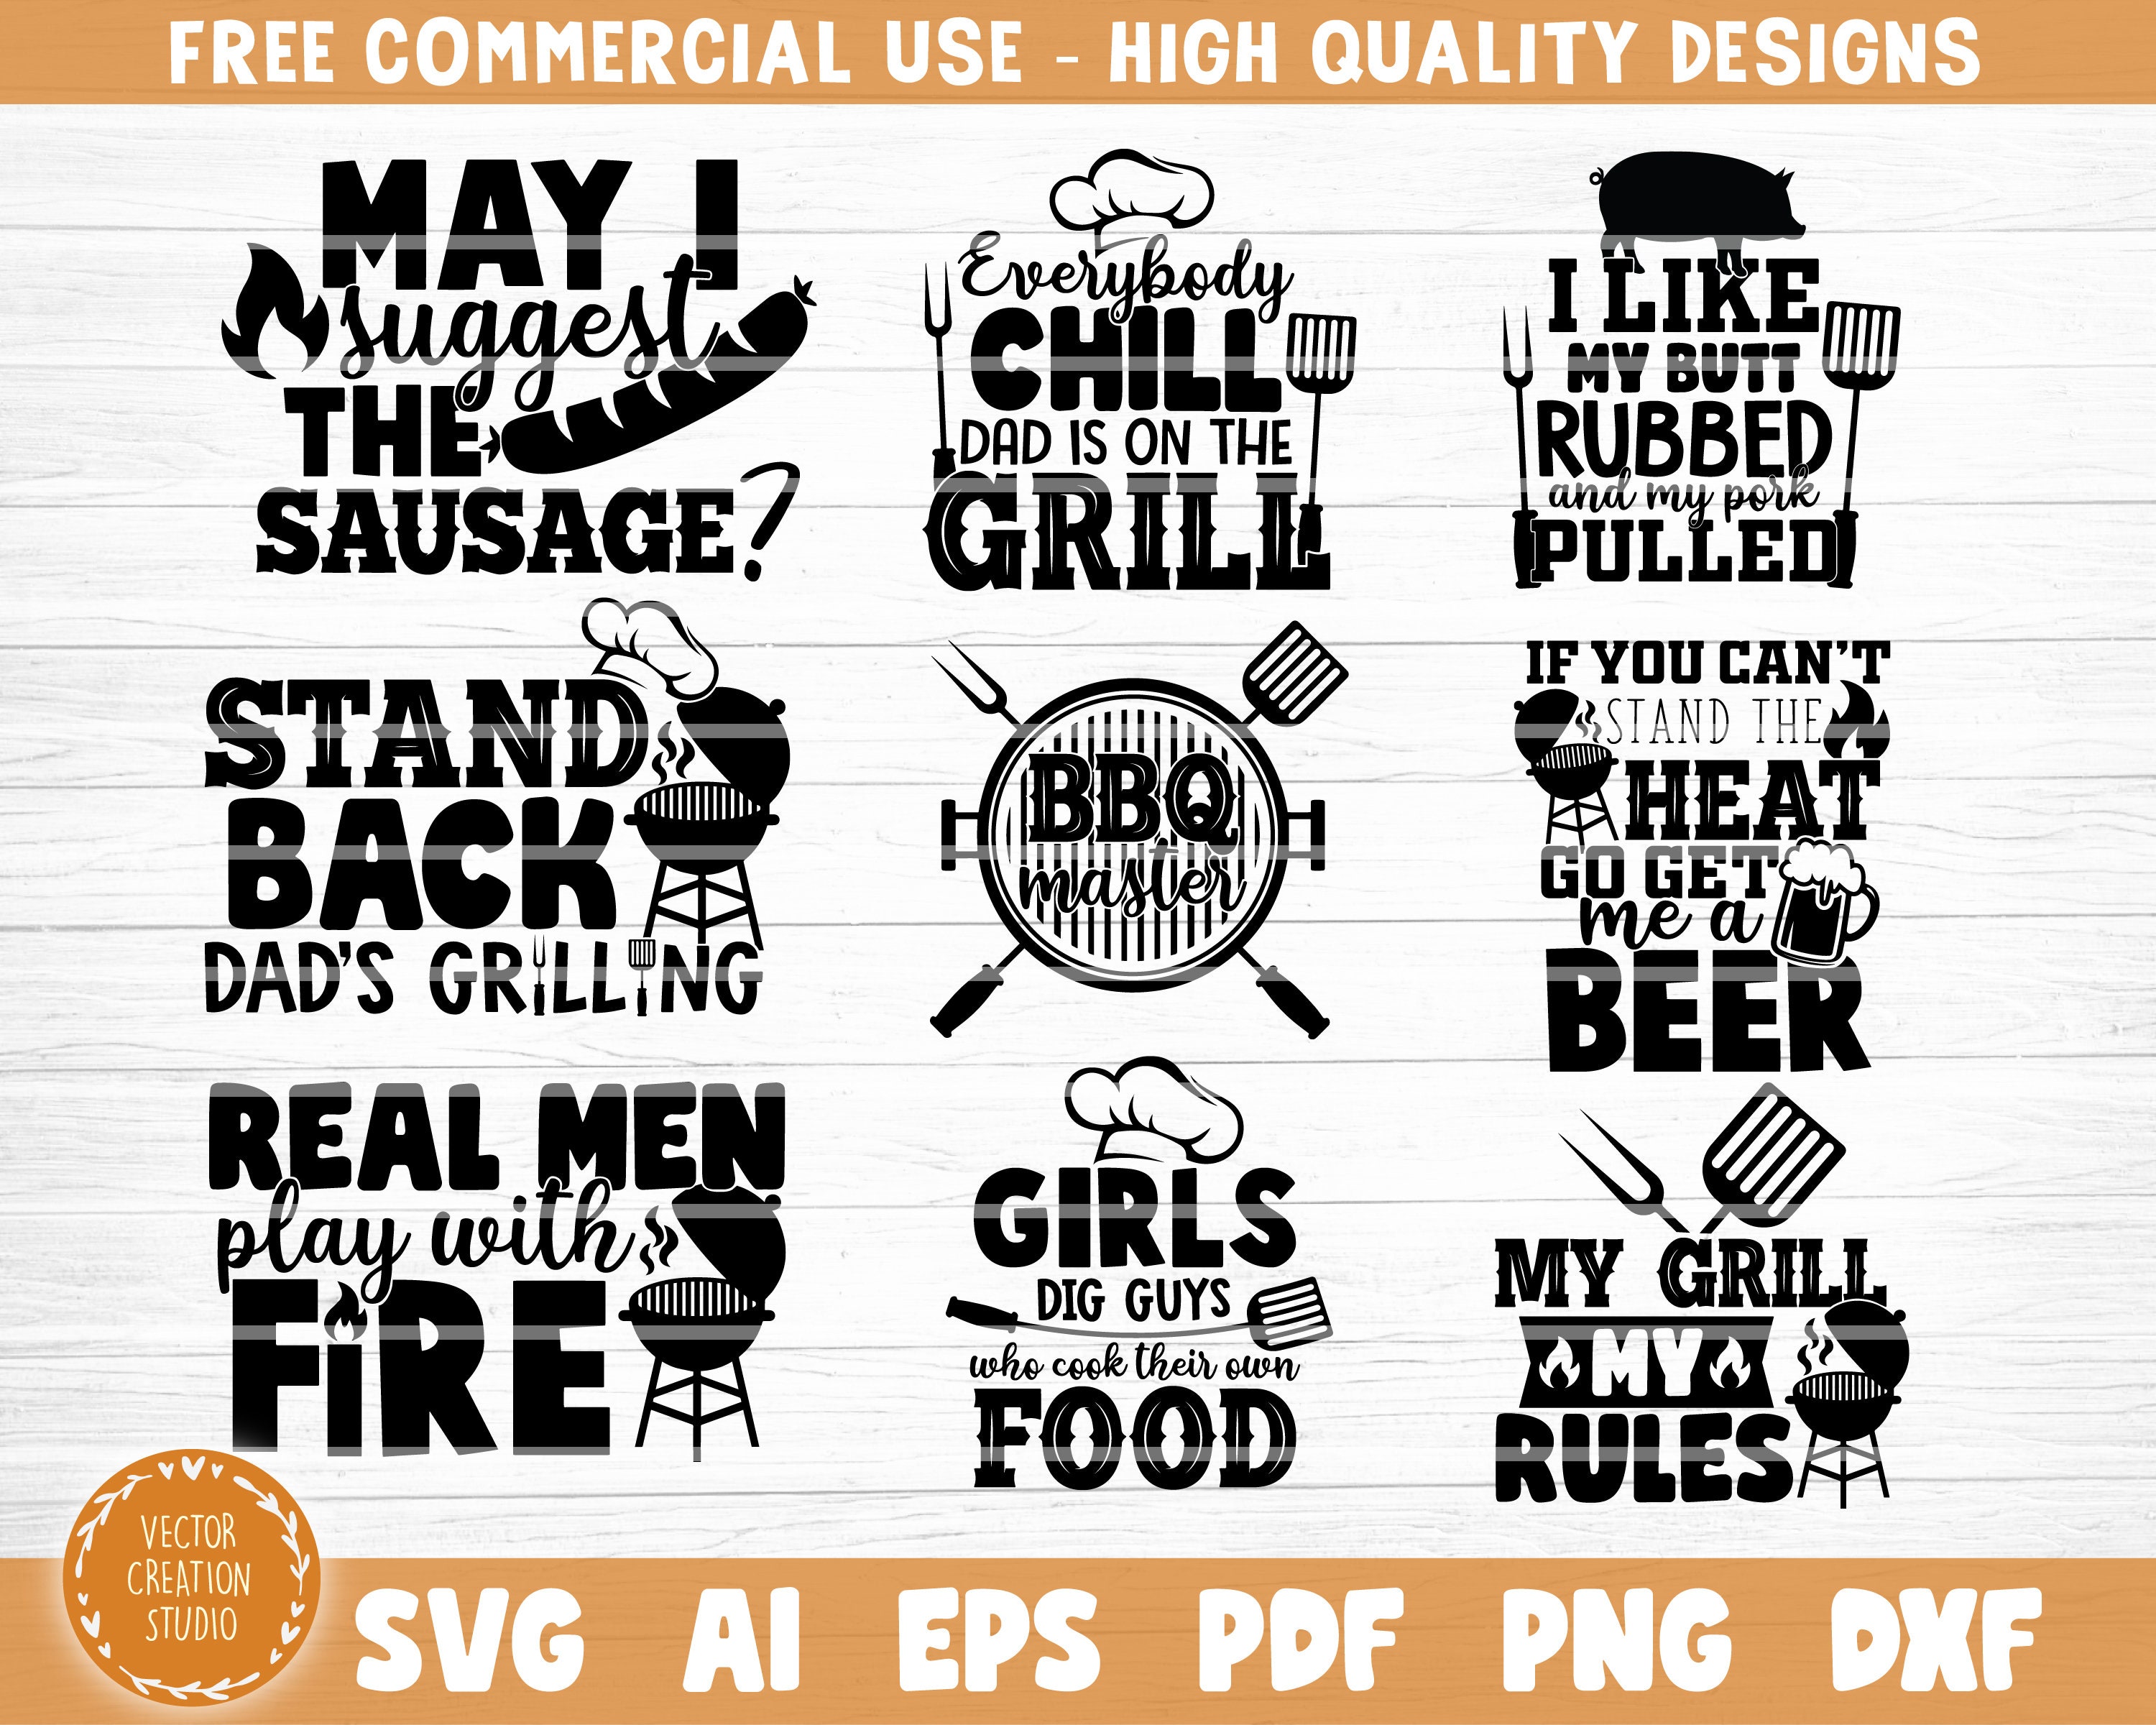 Grill Master's Timer Svg File, BBQ Timer Vector Printable Clipart, Funny  BBQ Quote Svg, Barbecue Grill Sayings Svg, BBQ Shirt Print, Decal